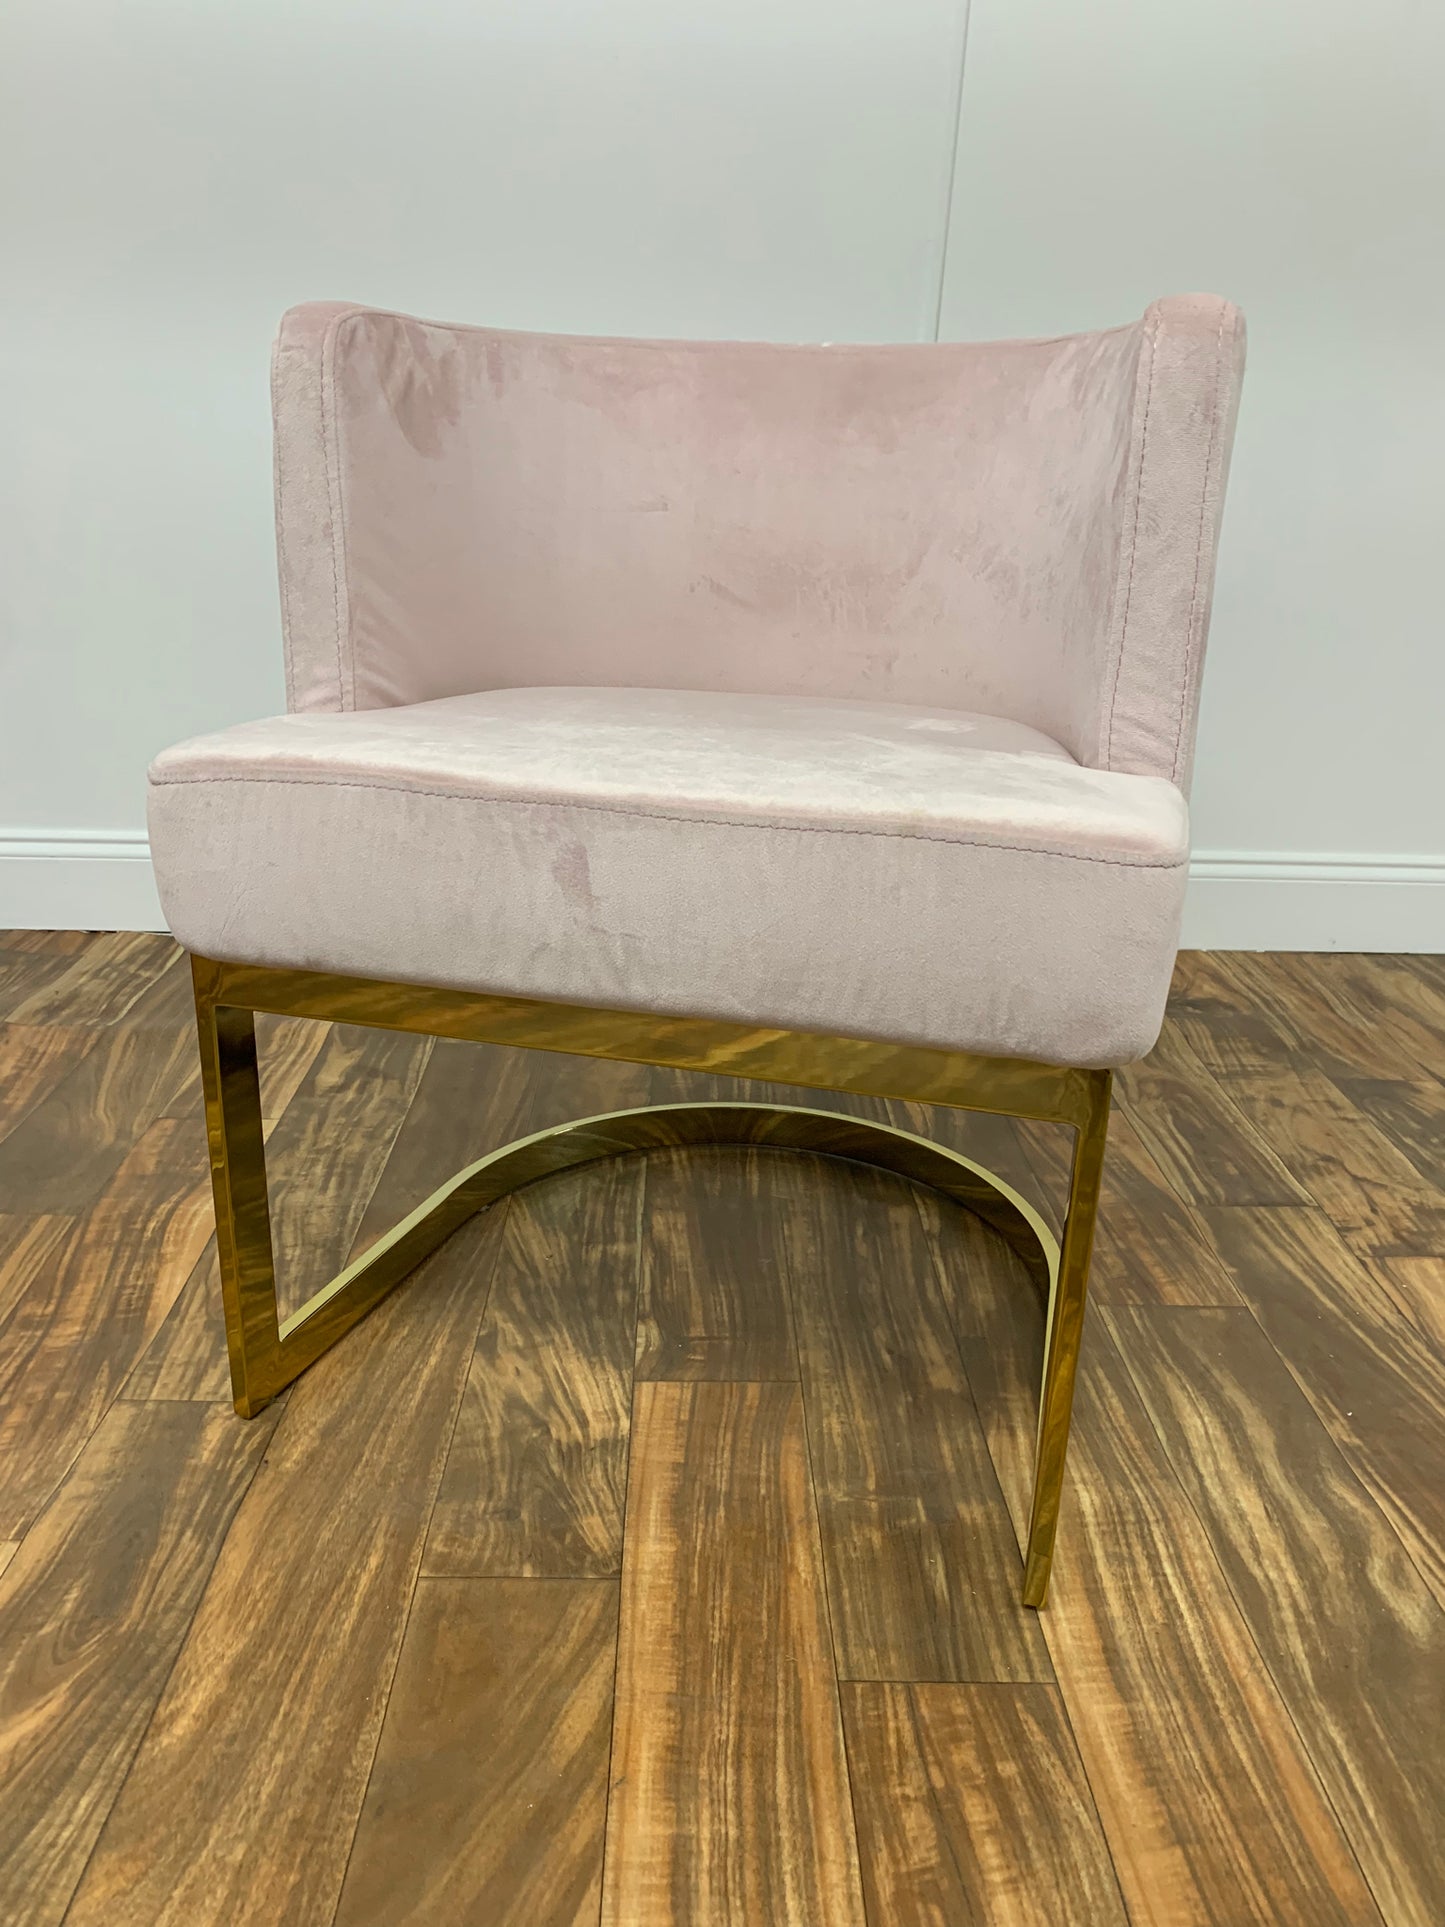 BABY PINK VELVET CLUB CHAIR WITH GOLD LEGS